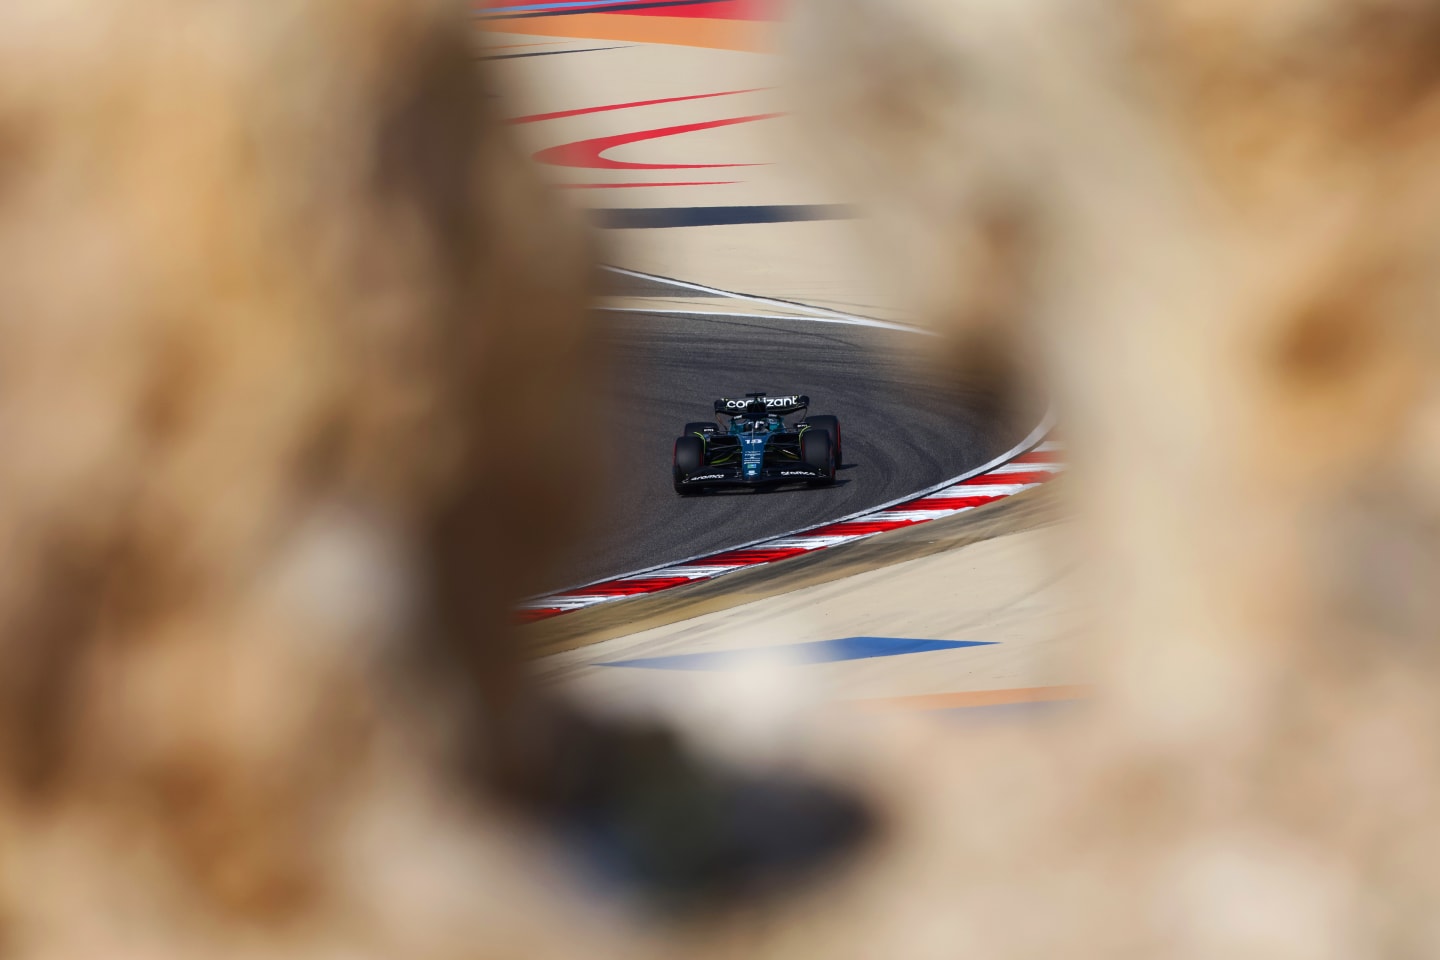 BAHRAIN, BAHRAIN - MARCH 04: Lance Stroll of Canada driving the (18) Aston Martin AMR23 Mercedes on track during final practice ahead of the F1 Grand Prix of Bahrain at Bahrain International Circuit on March 04, 2023 in Bahrain, Bahrain. (Photo by Dan Istitene - Formula 1/Formula 1 via Getty Images)